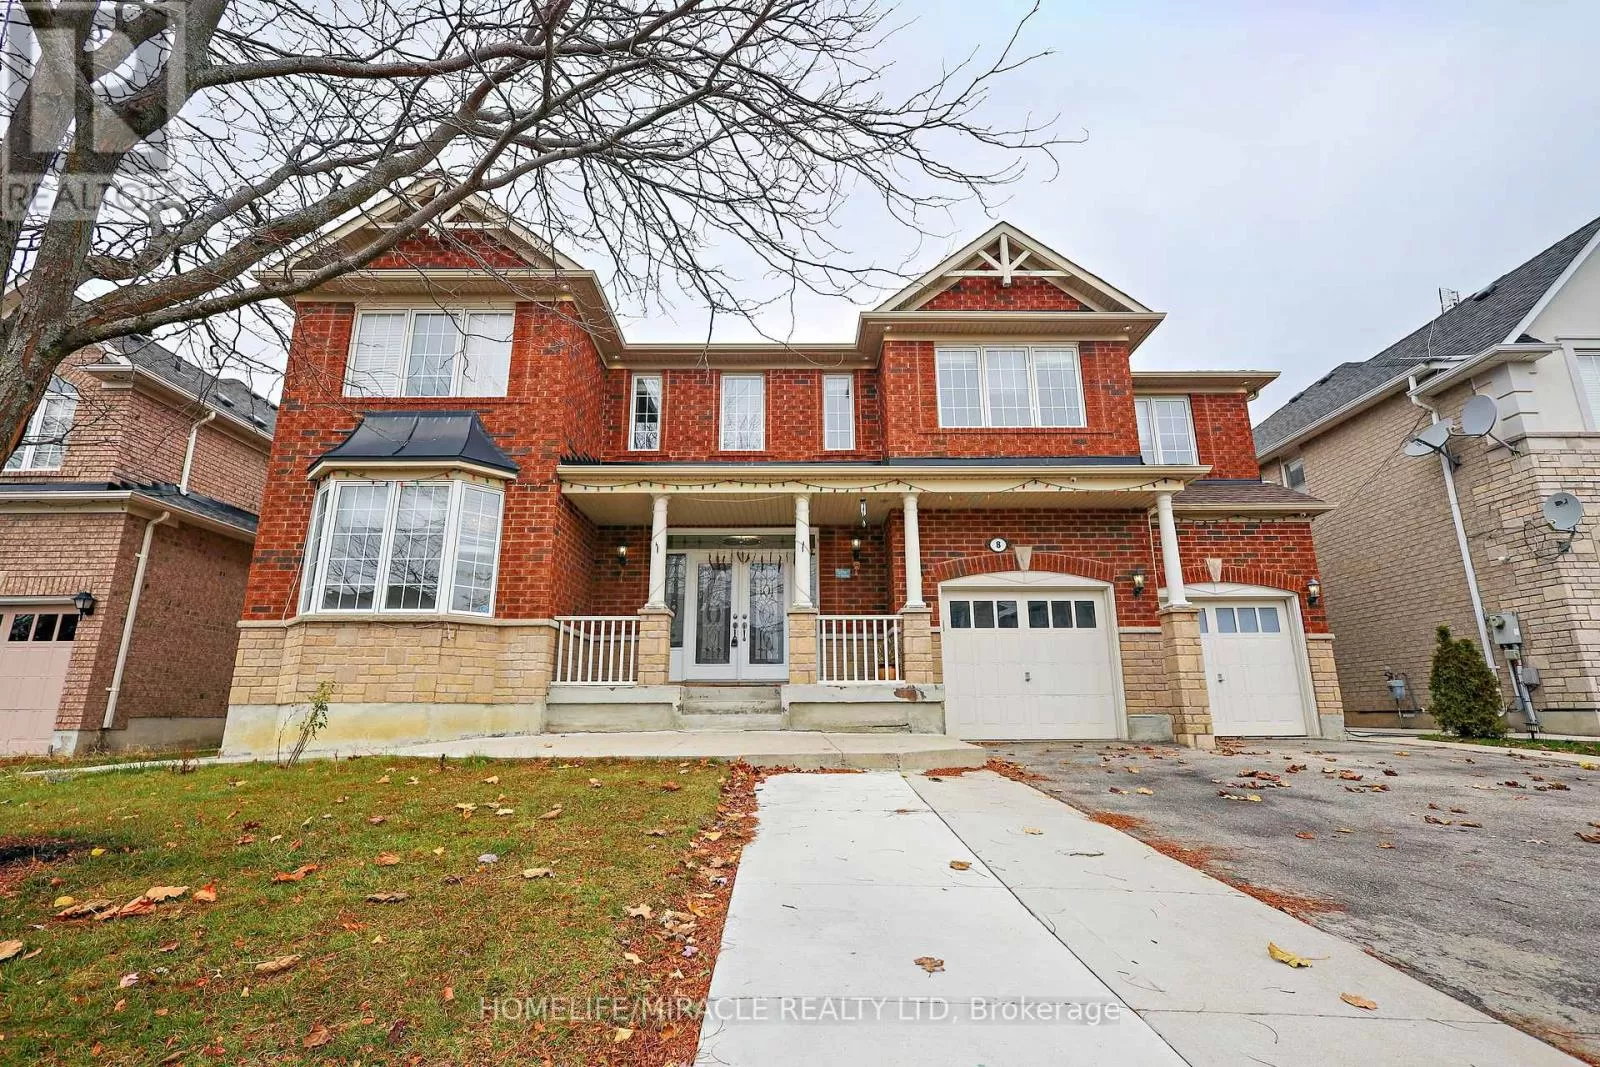 House for rent: 8 Nelly Court, Brampton, Ontario L6P 2G5